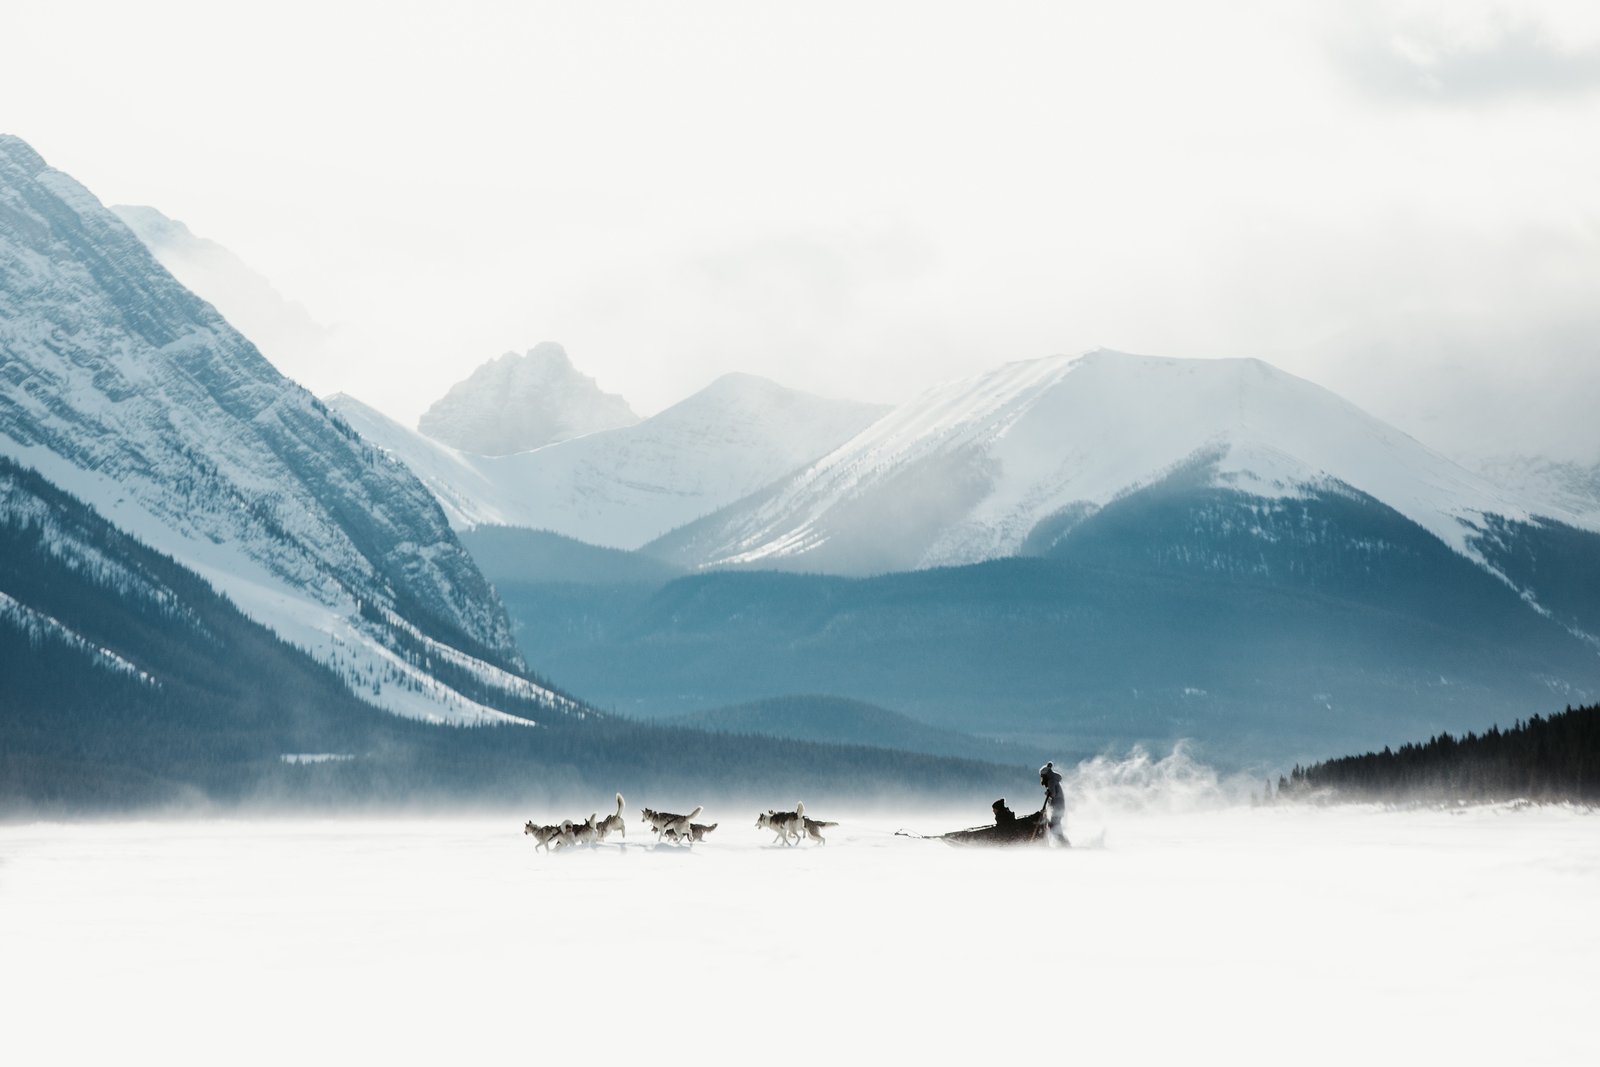 A dog sled crosses a frozen lake causing snow to spray up behind the riders with mountains in the background on a wintery day.